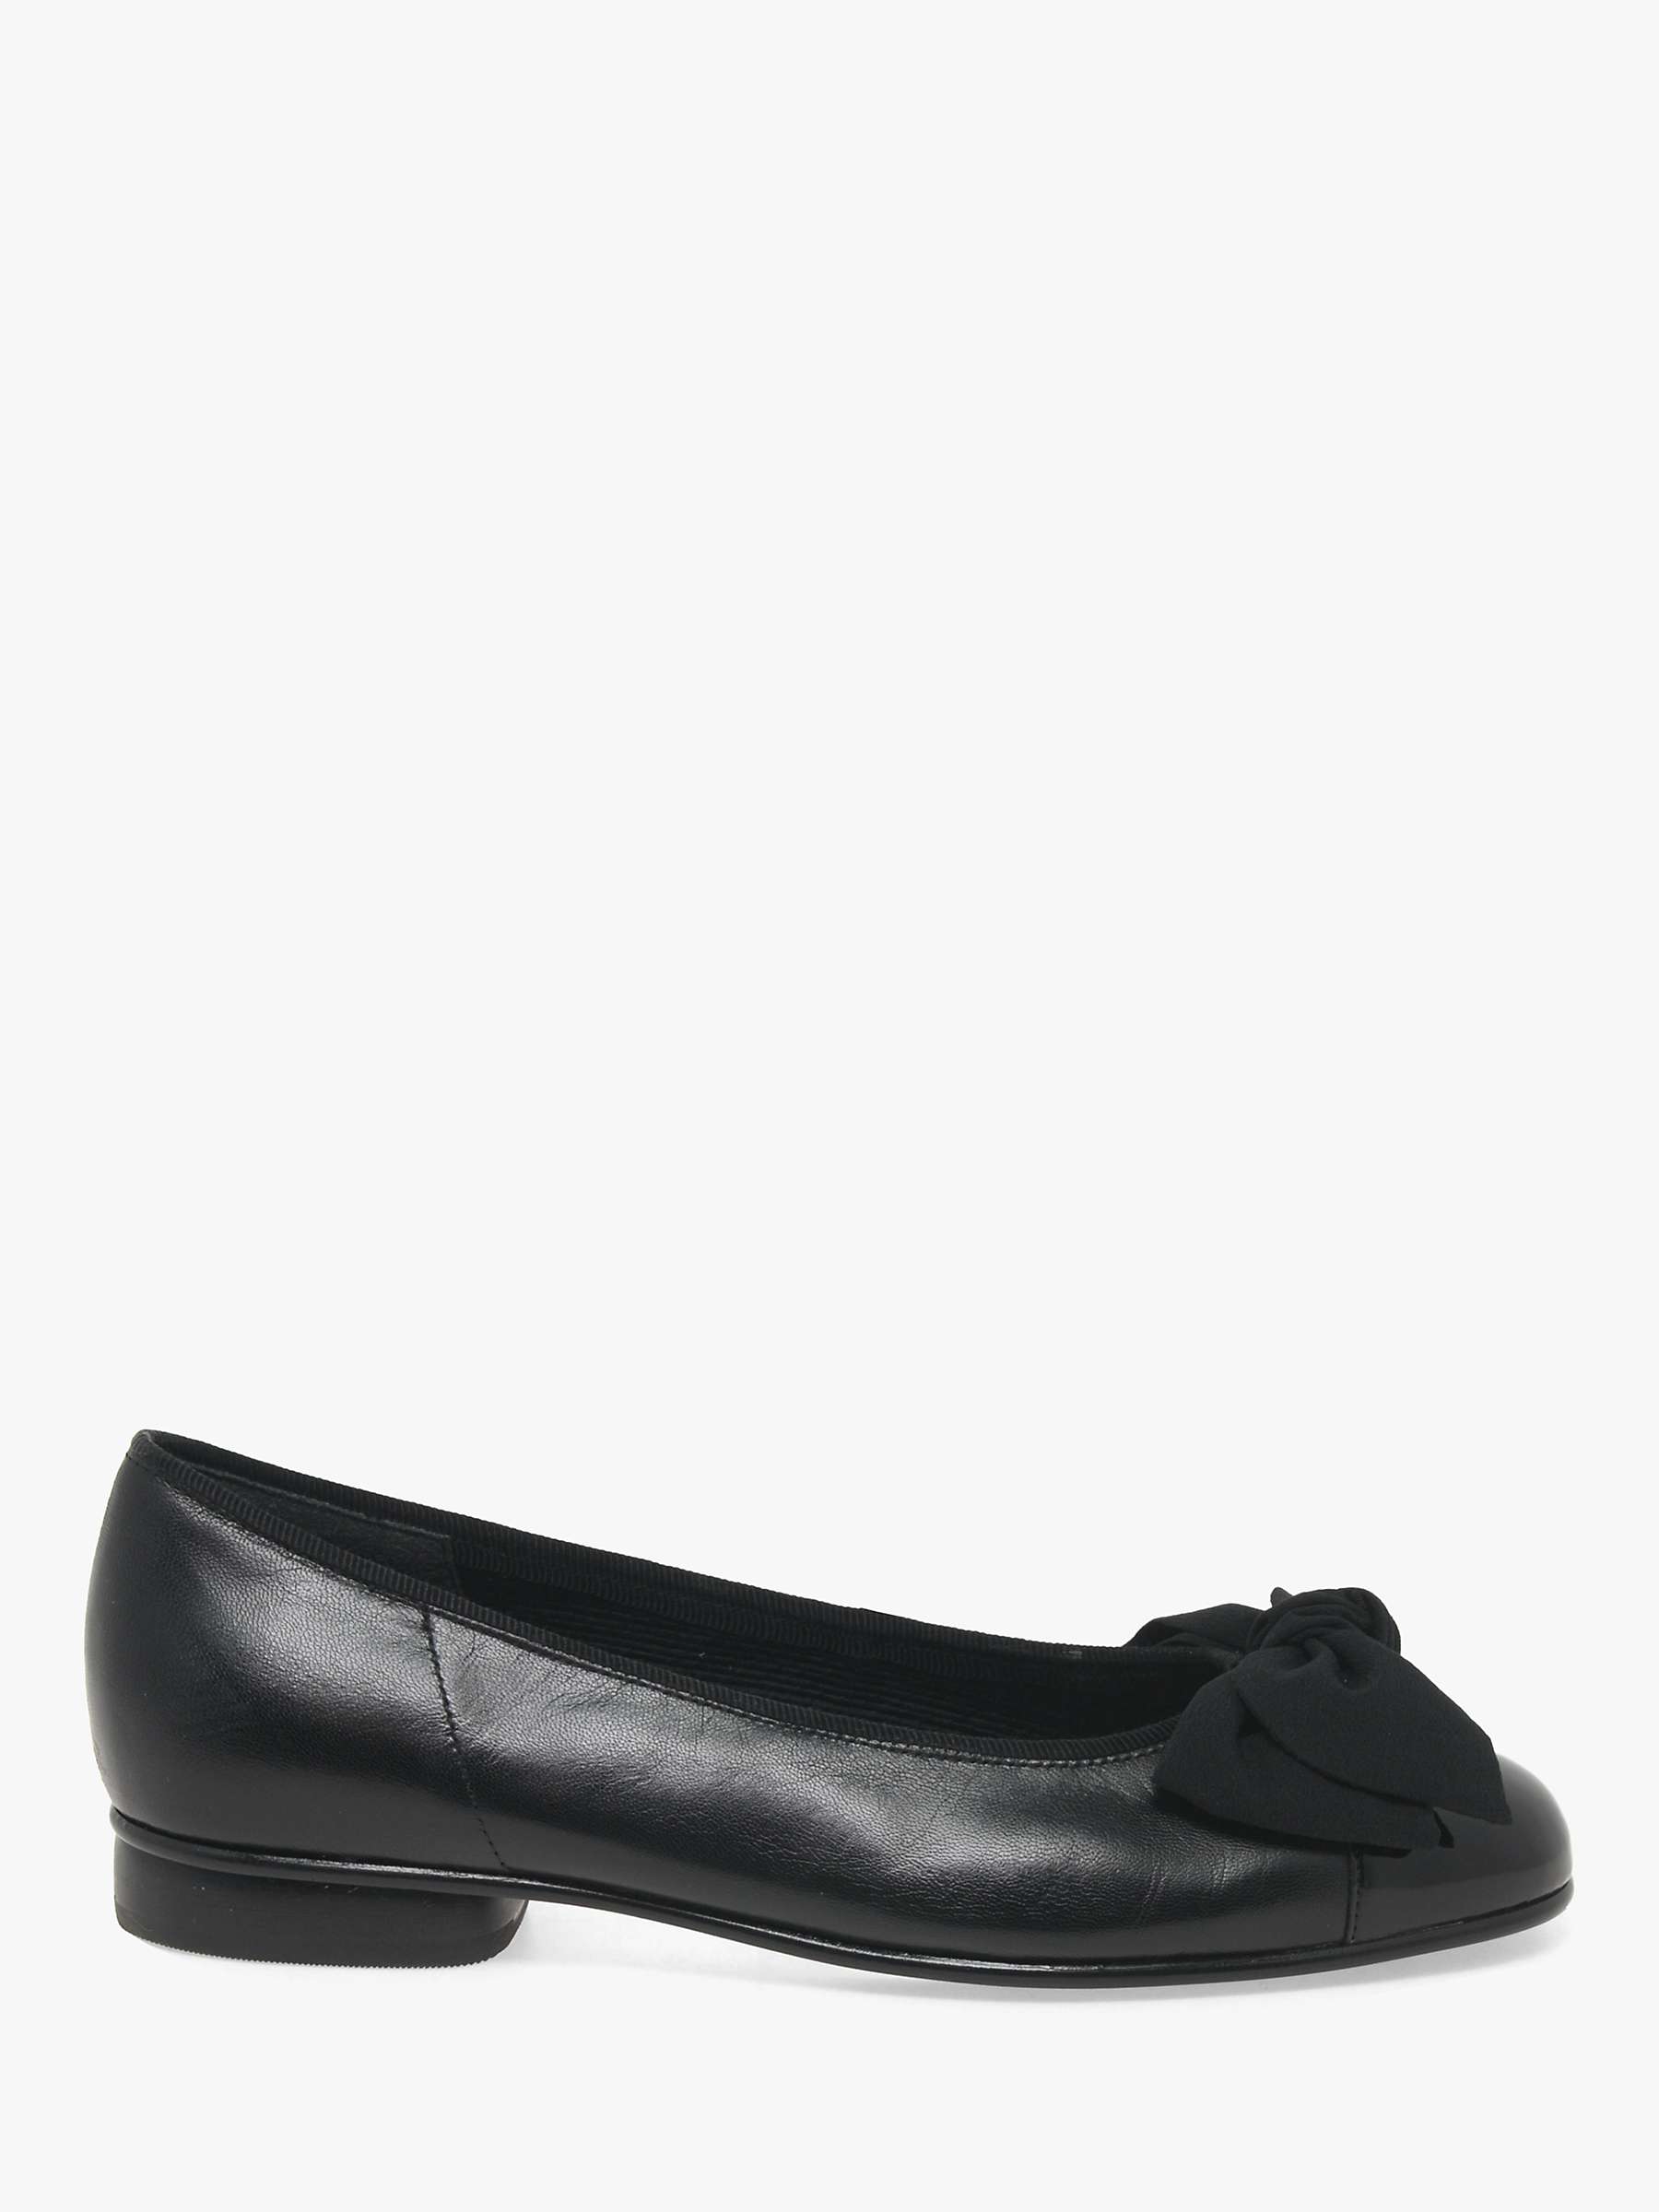 Gabor Amy Patent Leather Ballet Pumps, at John Lewis & Partners